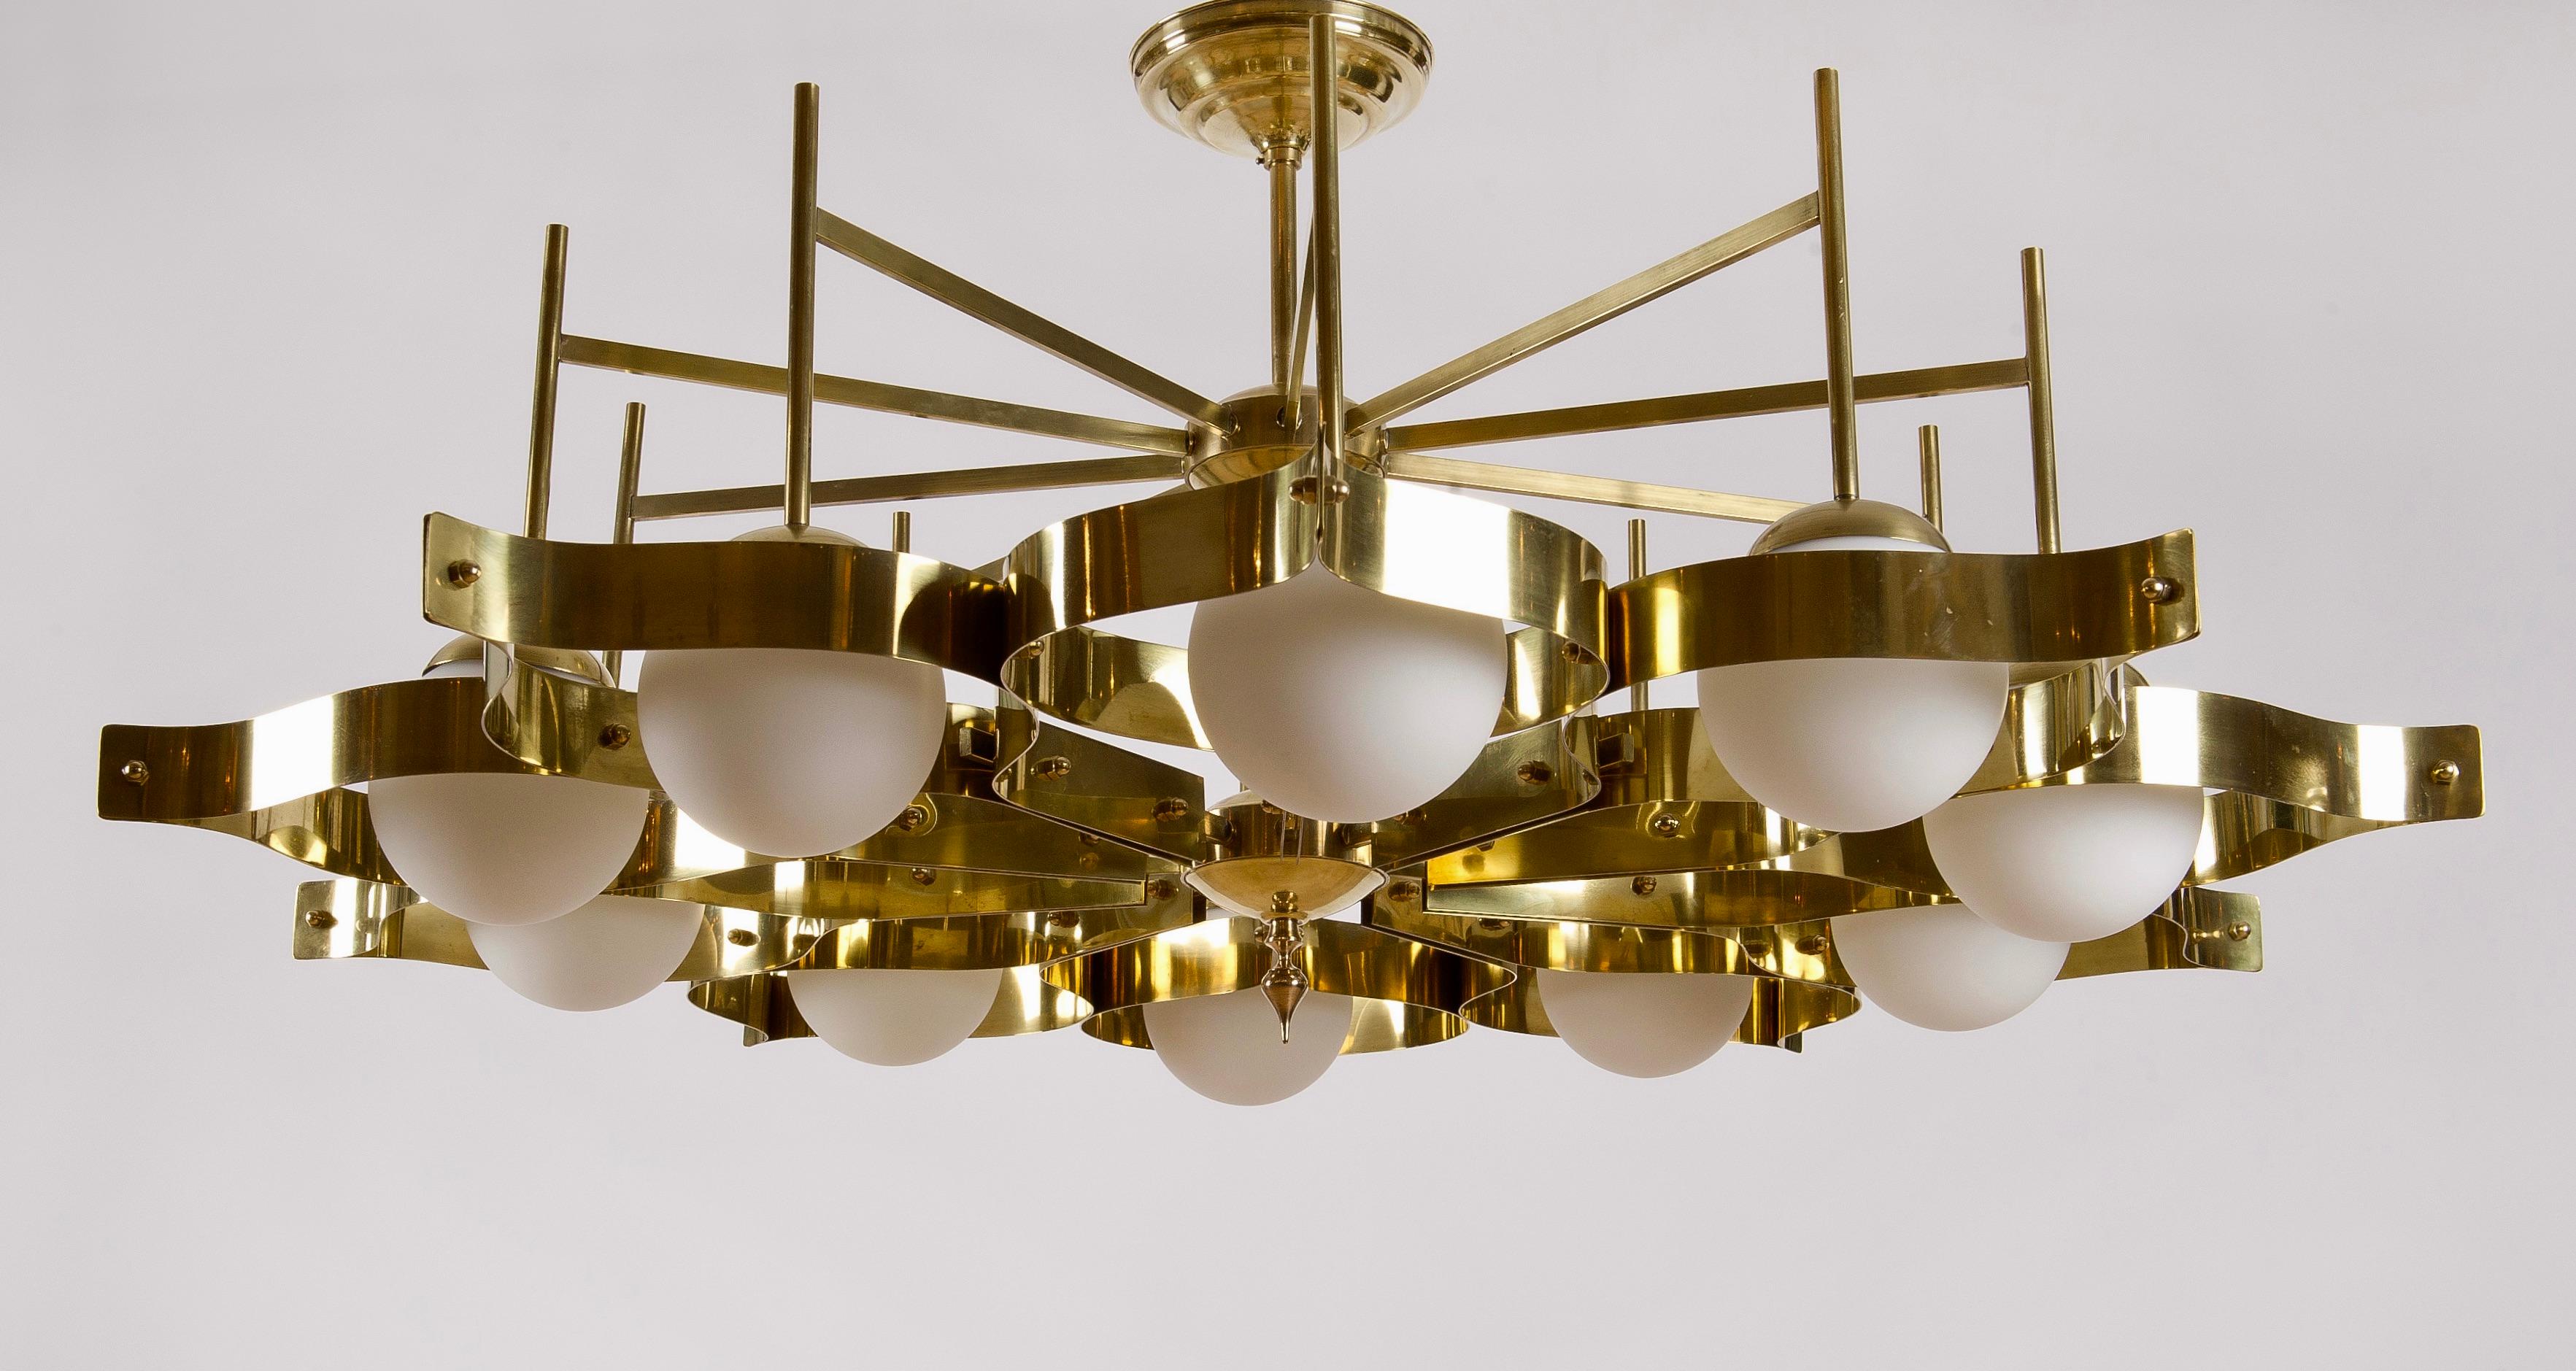 An impressive 10-light brass and opaline glass ceiling light in the manner of Ponti's highly acclaimed 'Pavone' design for Arredoluce. This vintage 1960s circular flush mount has an intricate 'cellular' structure of finely curved brass sheets, all